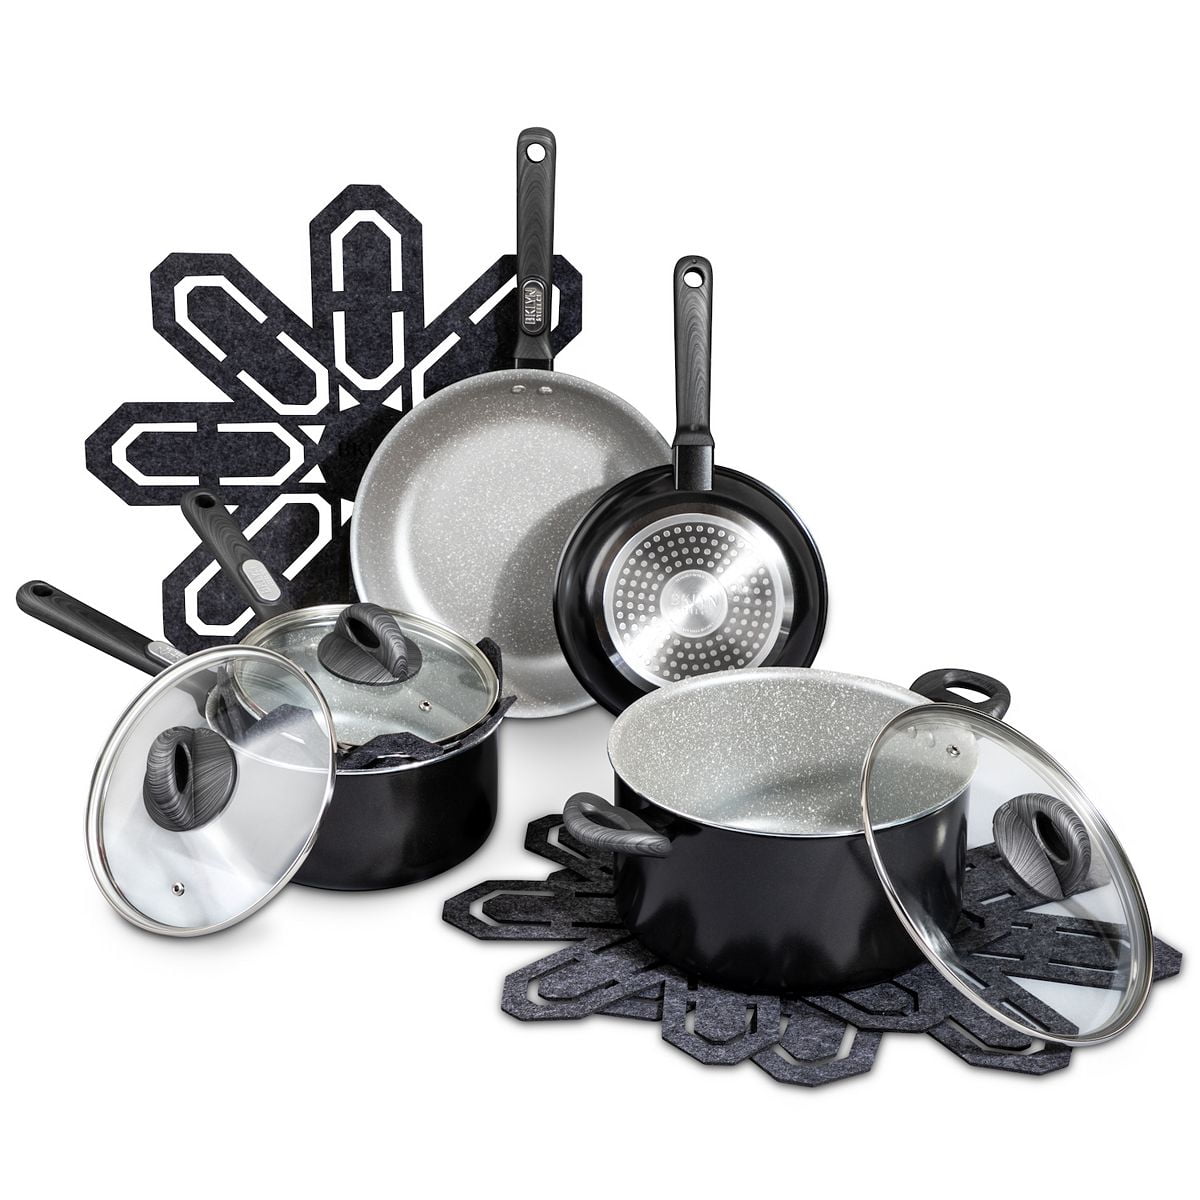 Brooklyn Steel Co. Cookware SOLSTICE 12 pc Non-Stick Pan Set, 1